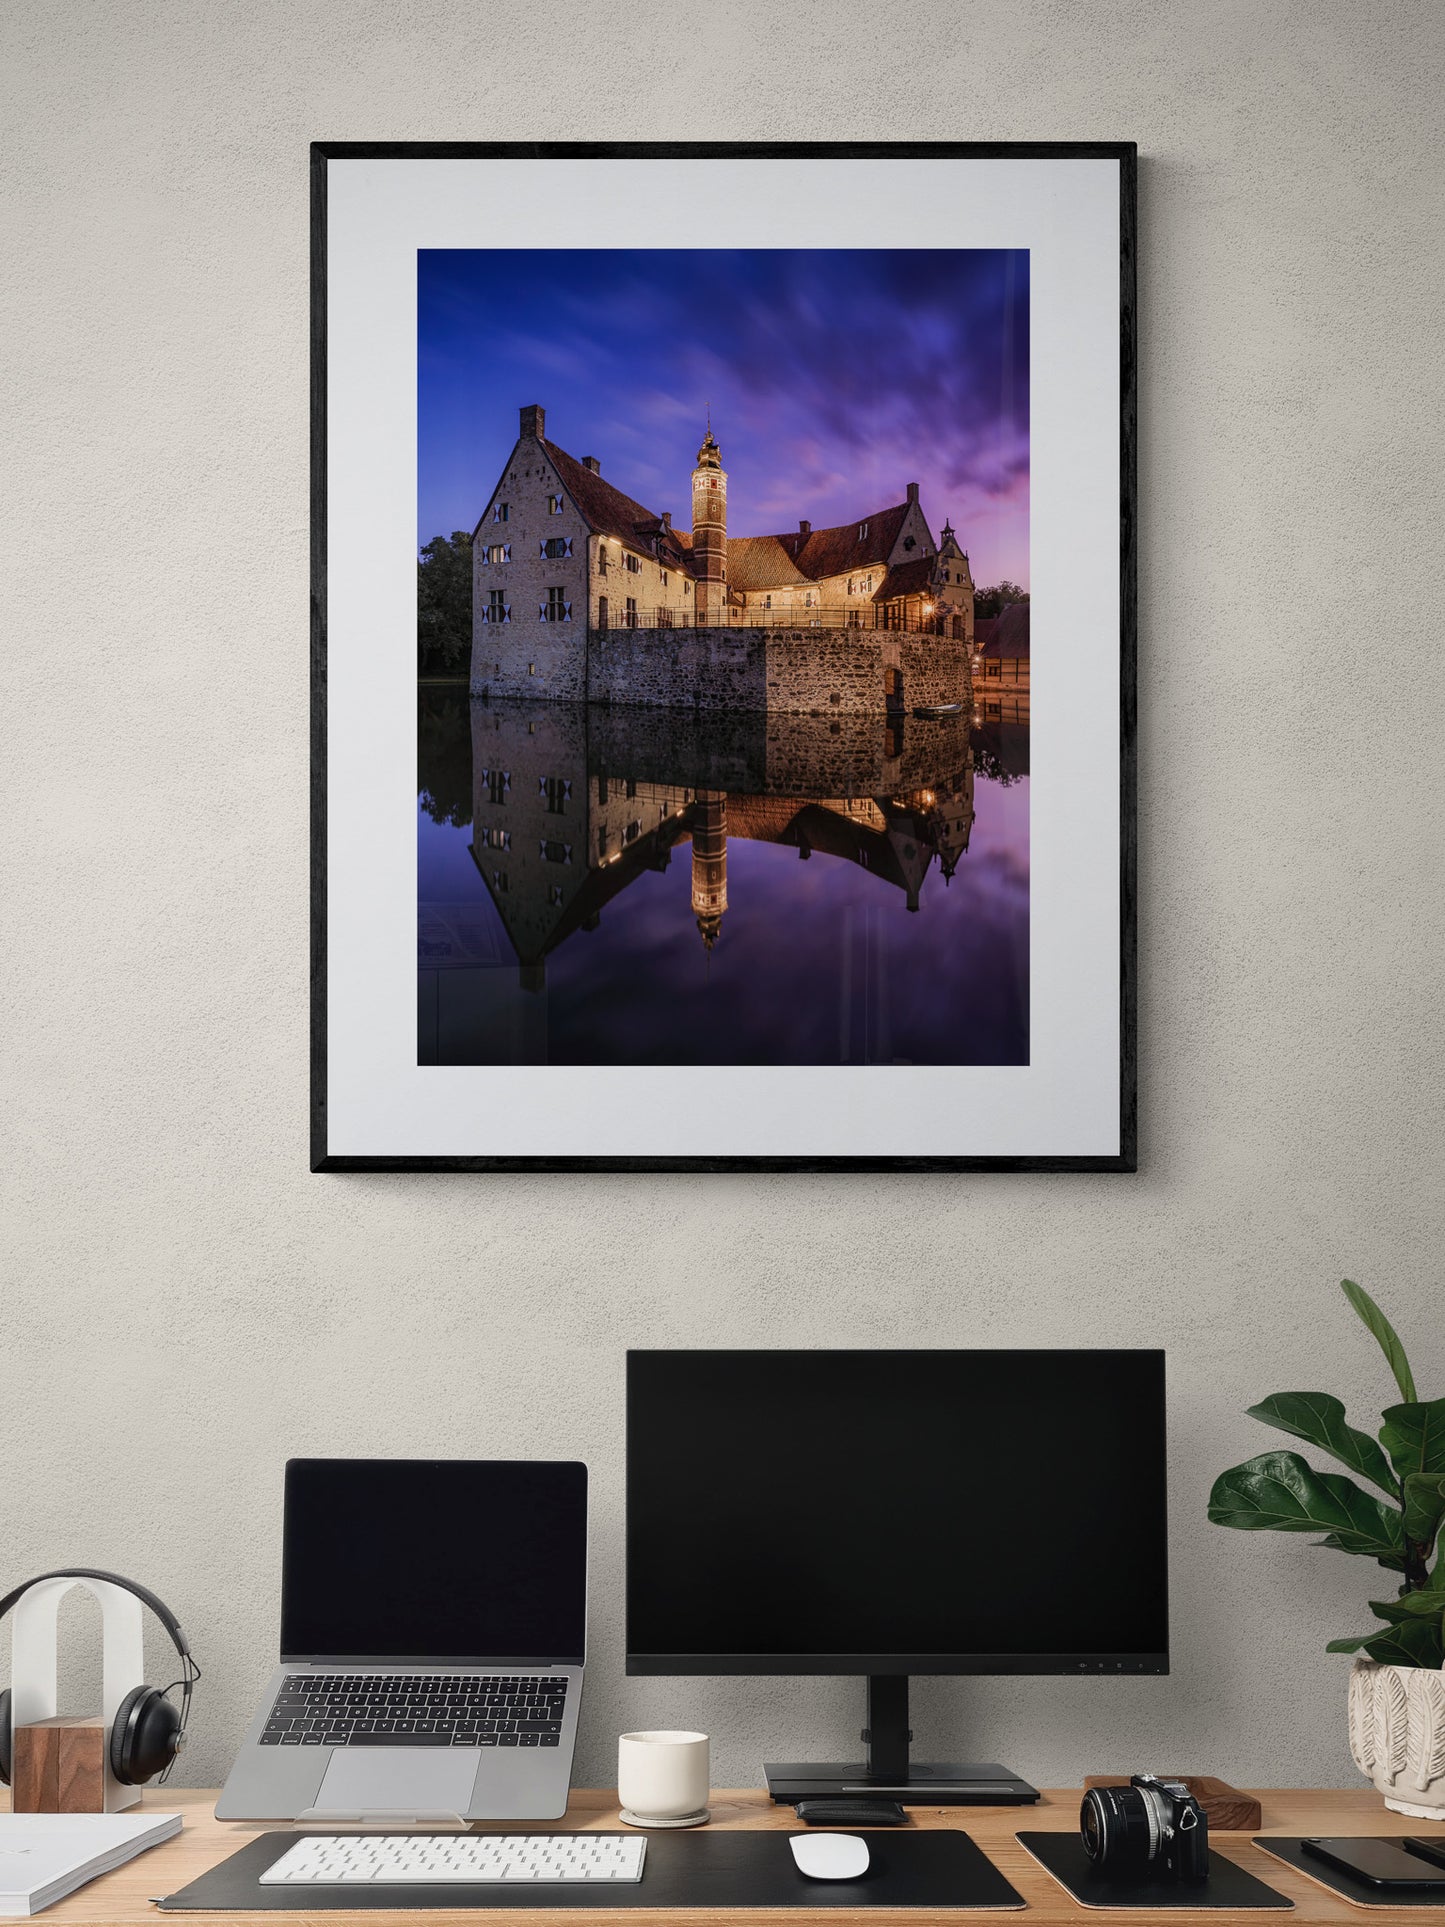 Image Title: Time flies by Photographer: Marcus Danz Location: Lüdinghausen, Germany Image description: Vischering Castle, my home town‘s medieval jewel, shines in all its beauty on this perfect summer evening shortly after sunset. High quality Fine Art print up to 36 inch / around 90 centimeters on Hahnemühle paper available. Large variant over computer desk.